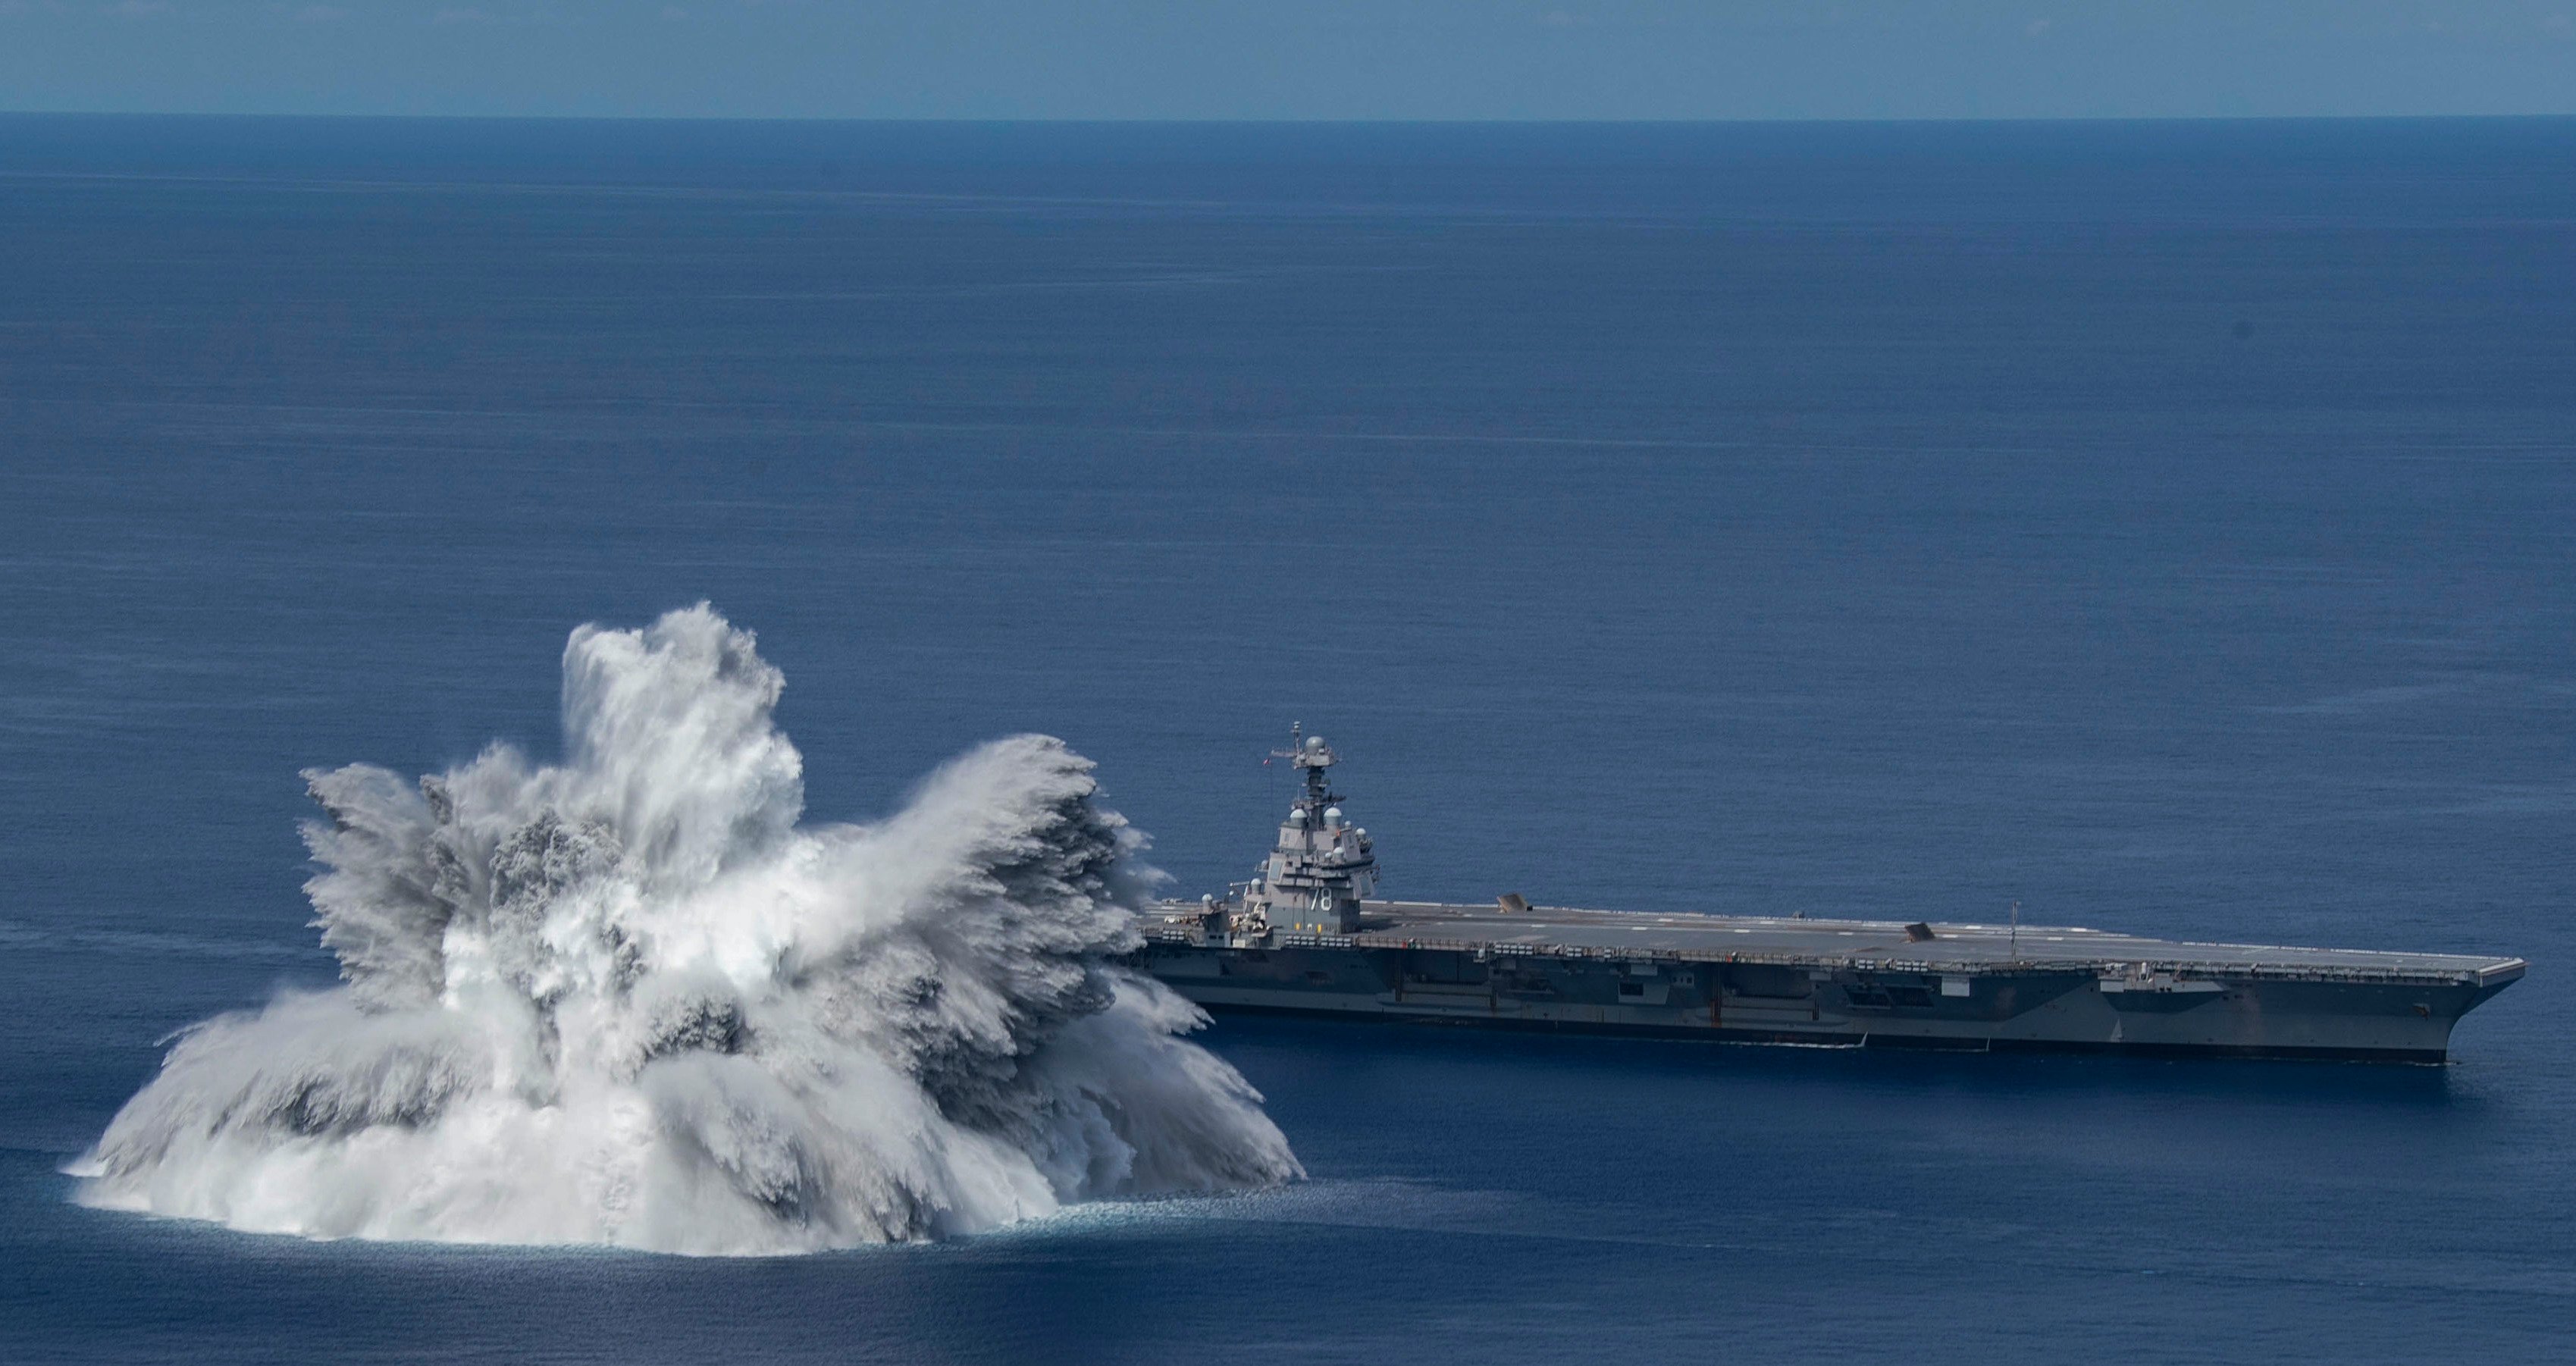 Video: Explosive Uss Gerald R. Ford Shock Trial Registered As 3.9 Magnitude  Earthquake - Usni News